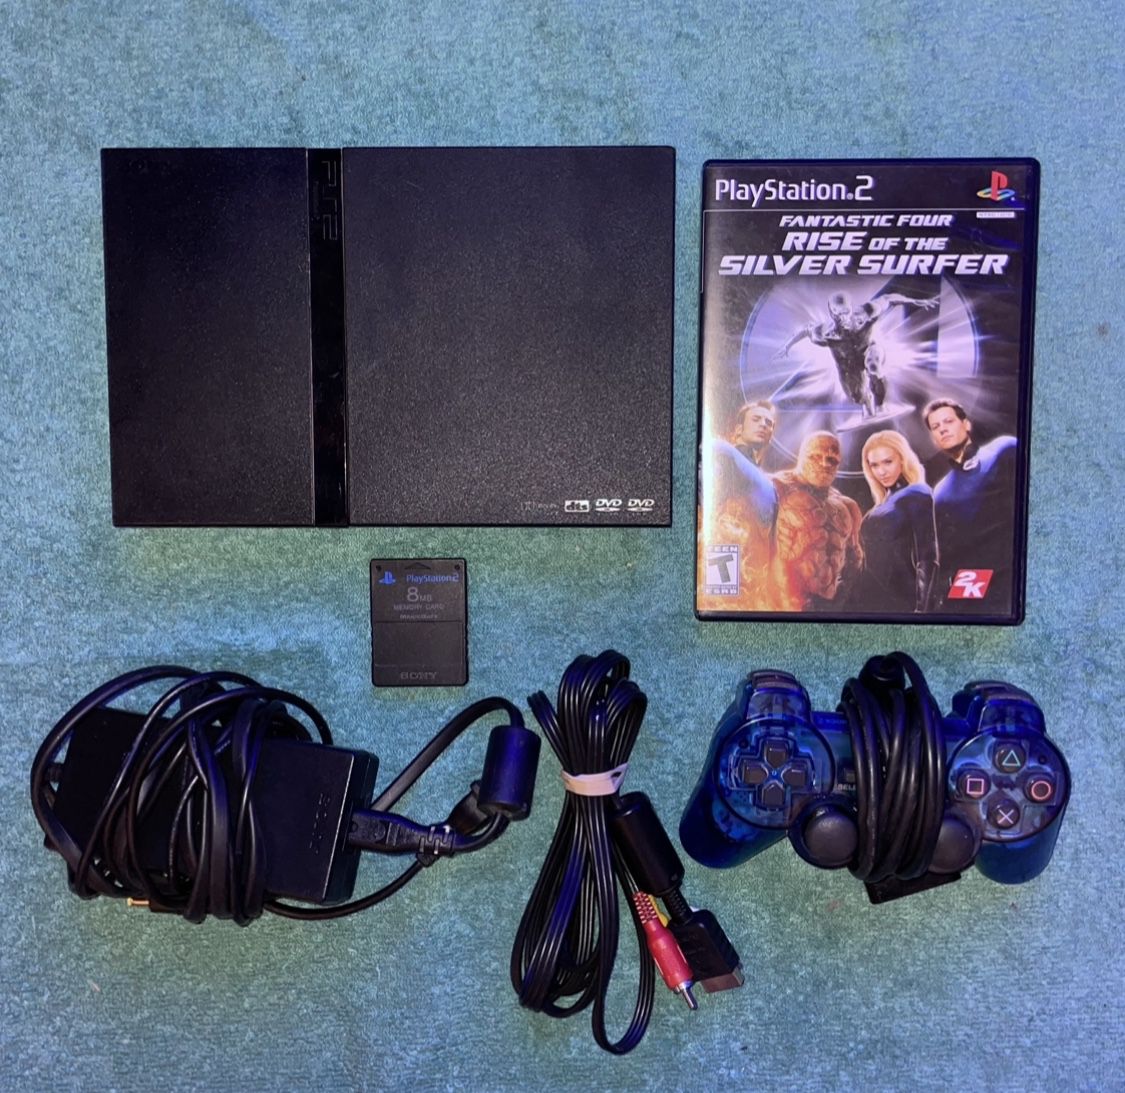 SONY PLAYSTATION 2 PS2 CONSOLE WITH VIDEO GAME & CONTROLLER